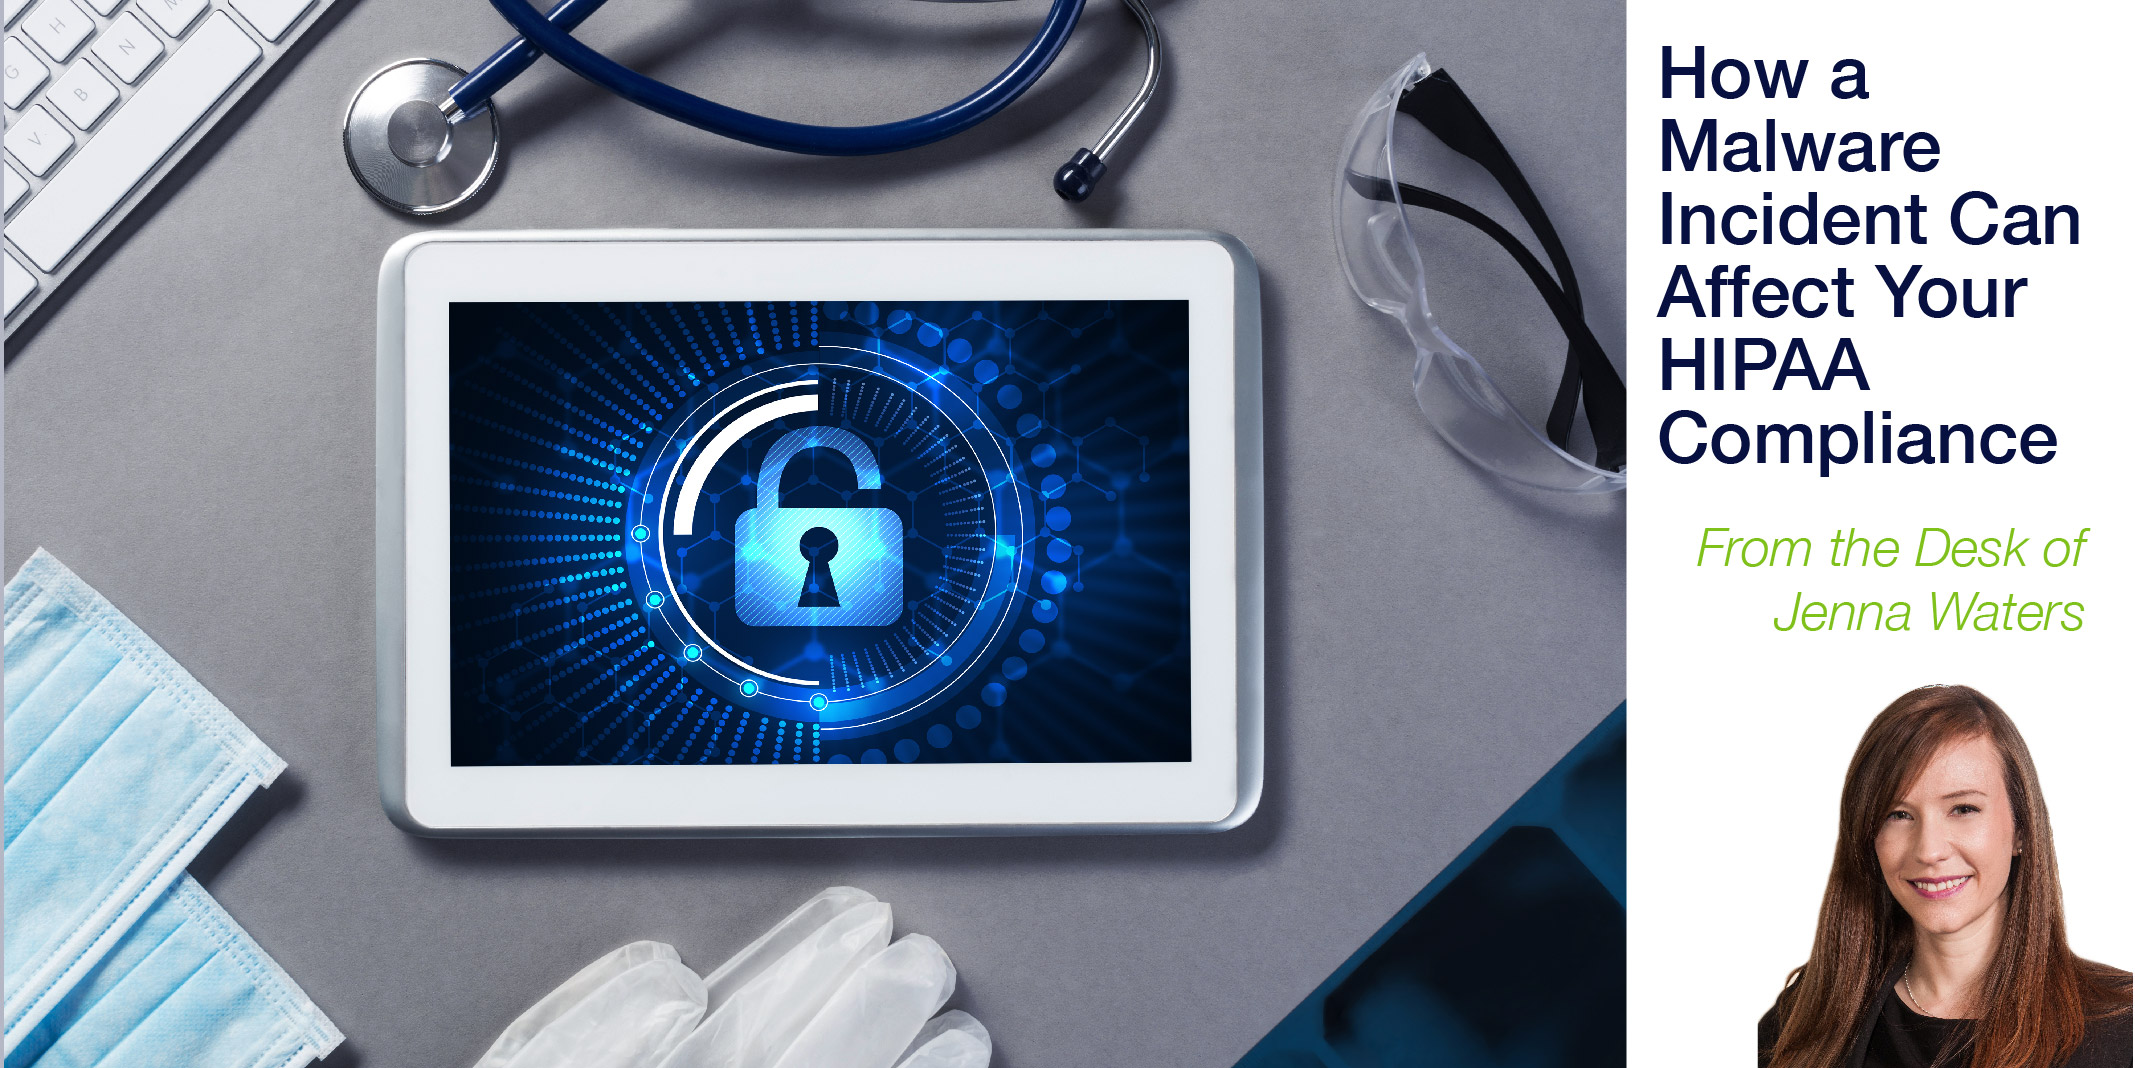 How a Malware Incident Can Affect Your HIPAA Compliance